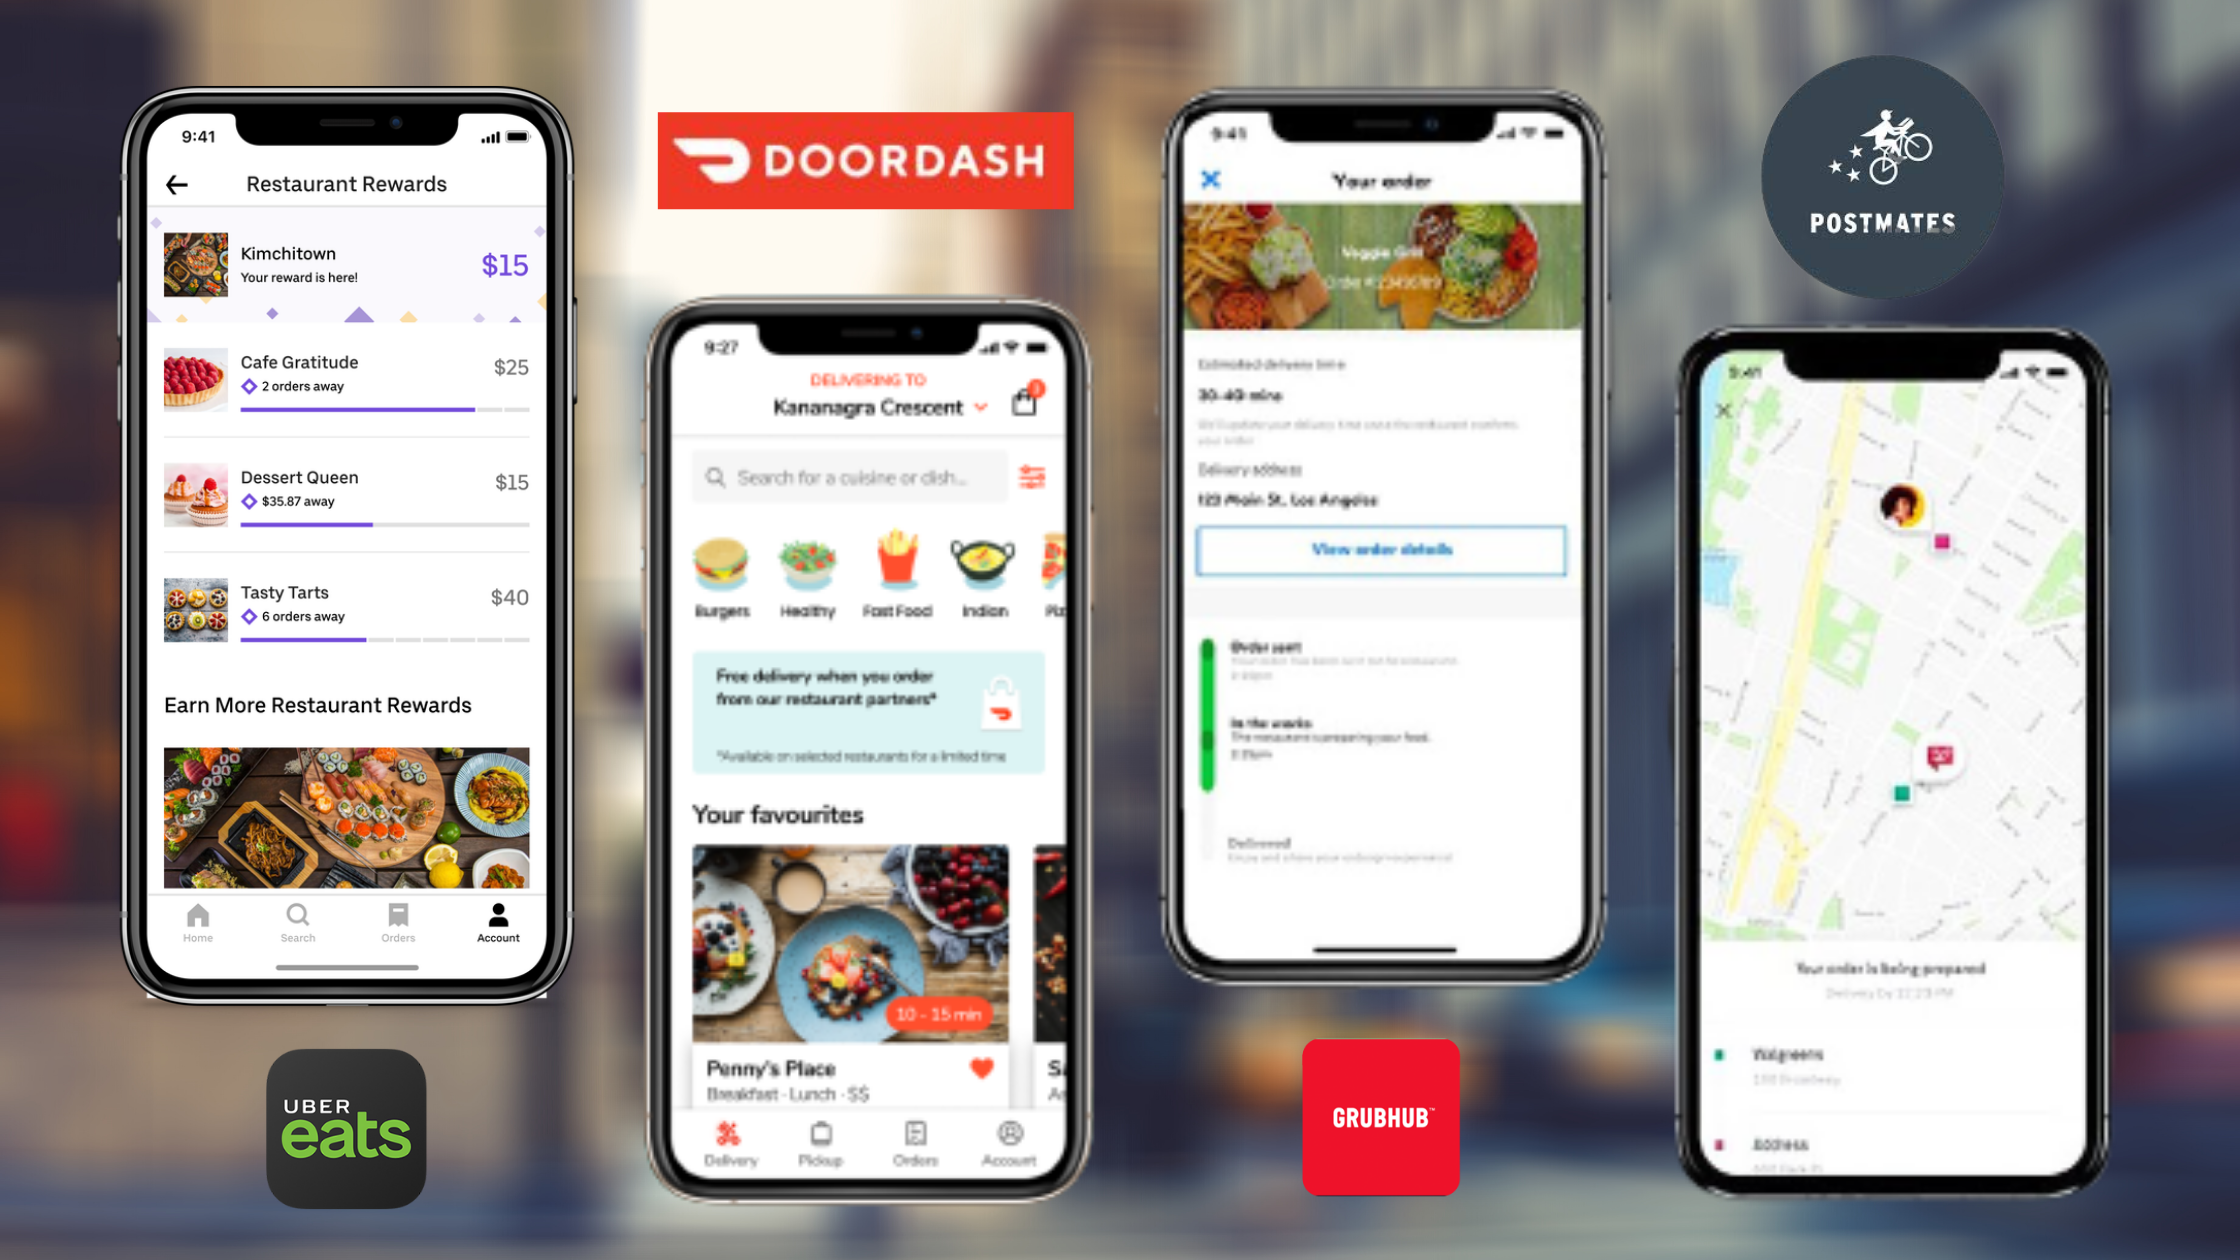 Four competitor user interfaces from UberEats, DoorDash, Grubhub, and Postmates.